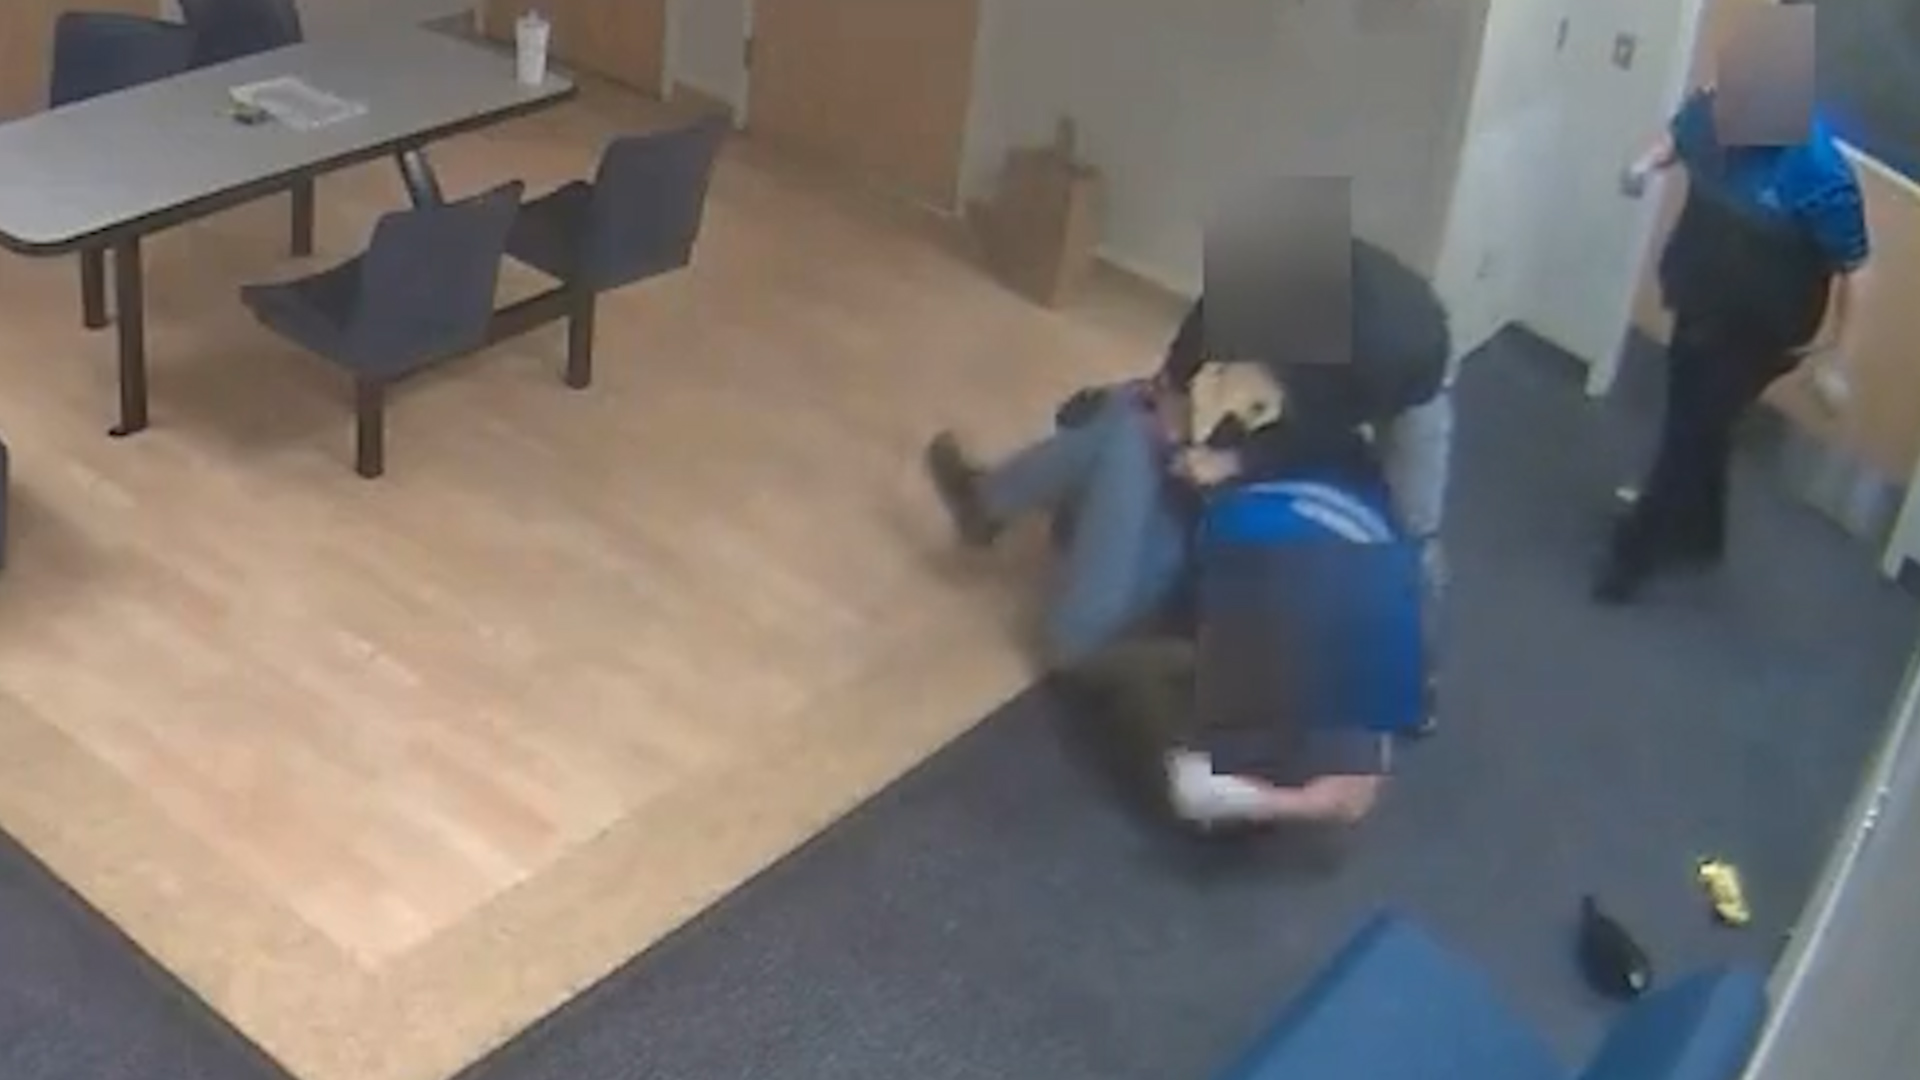 Surveillance video released to KSL shows a patient assaulting several people at a Provo hospital on...